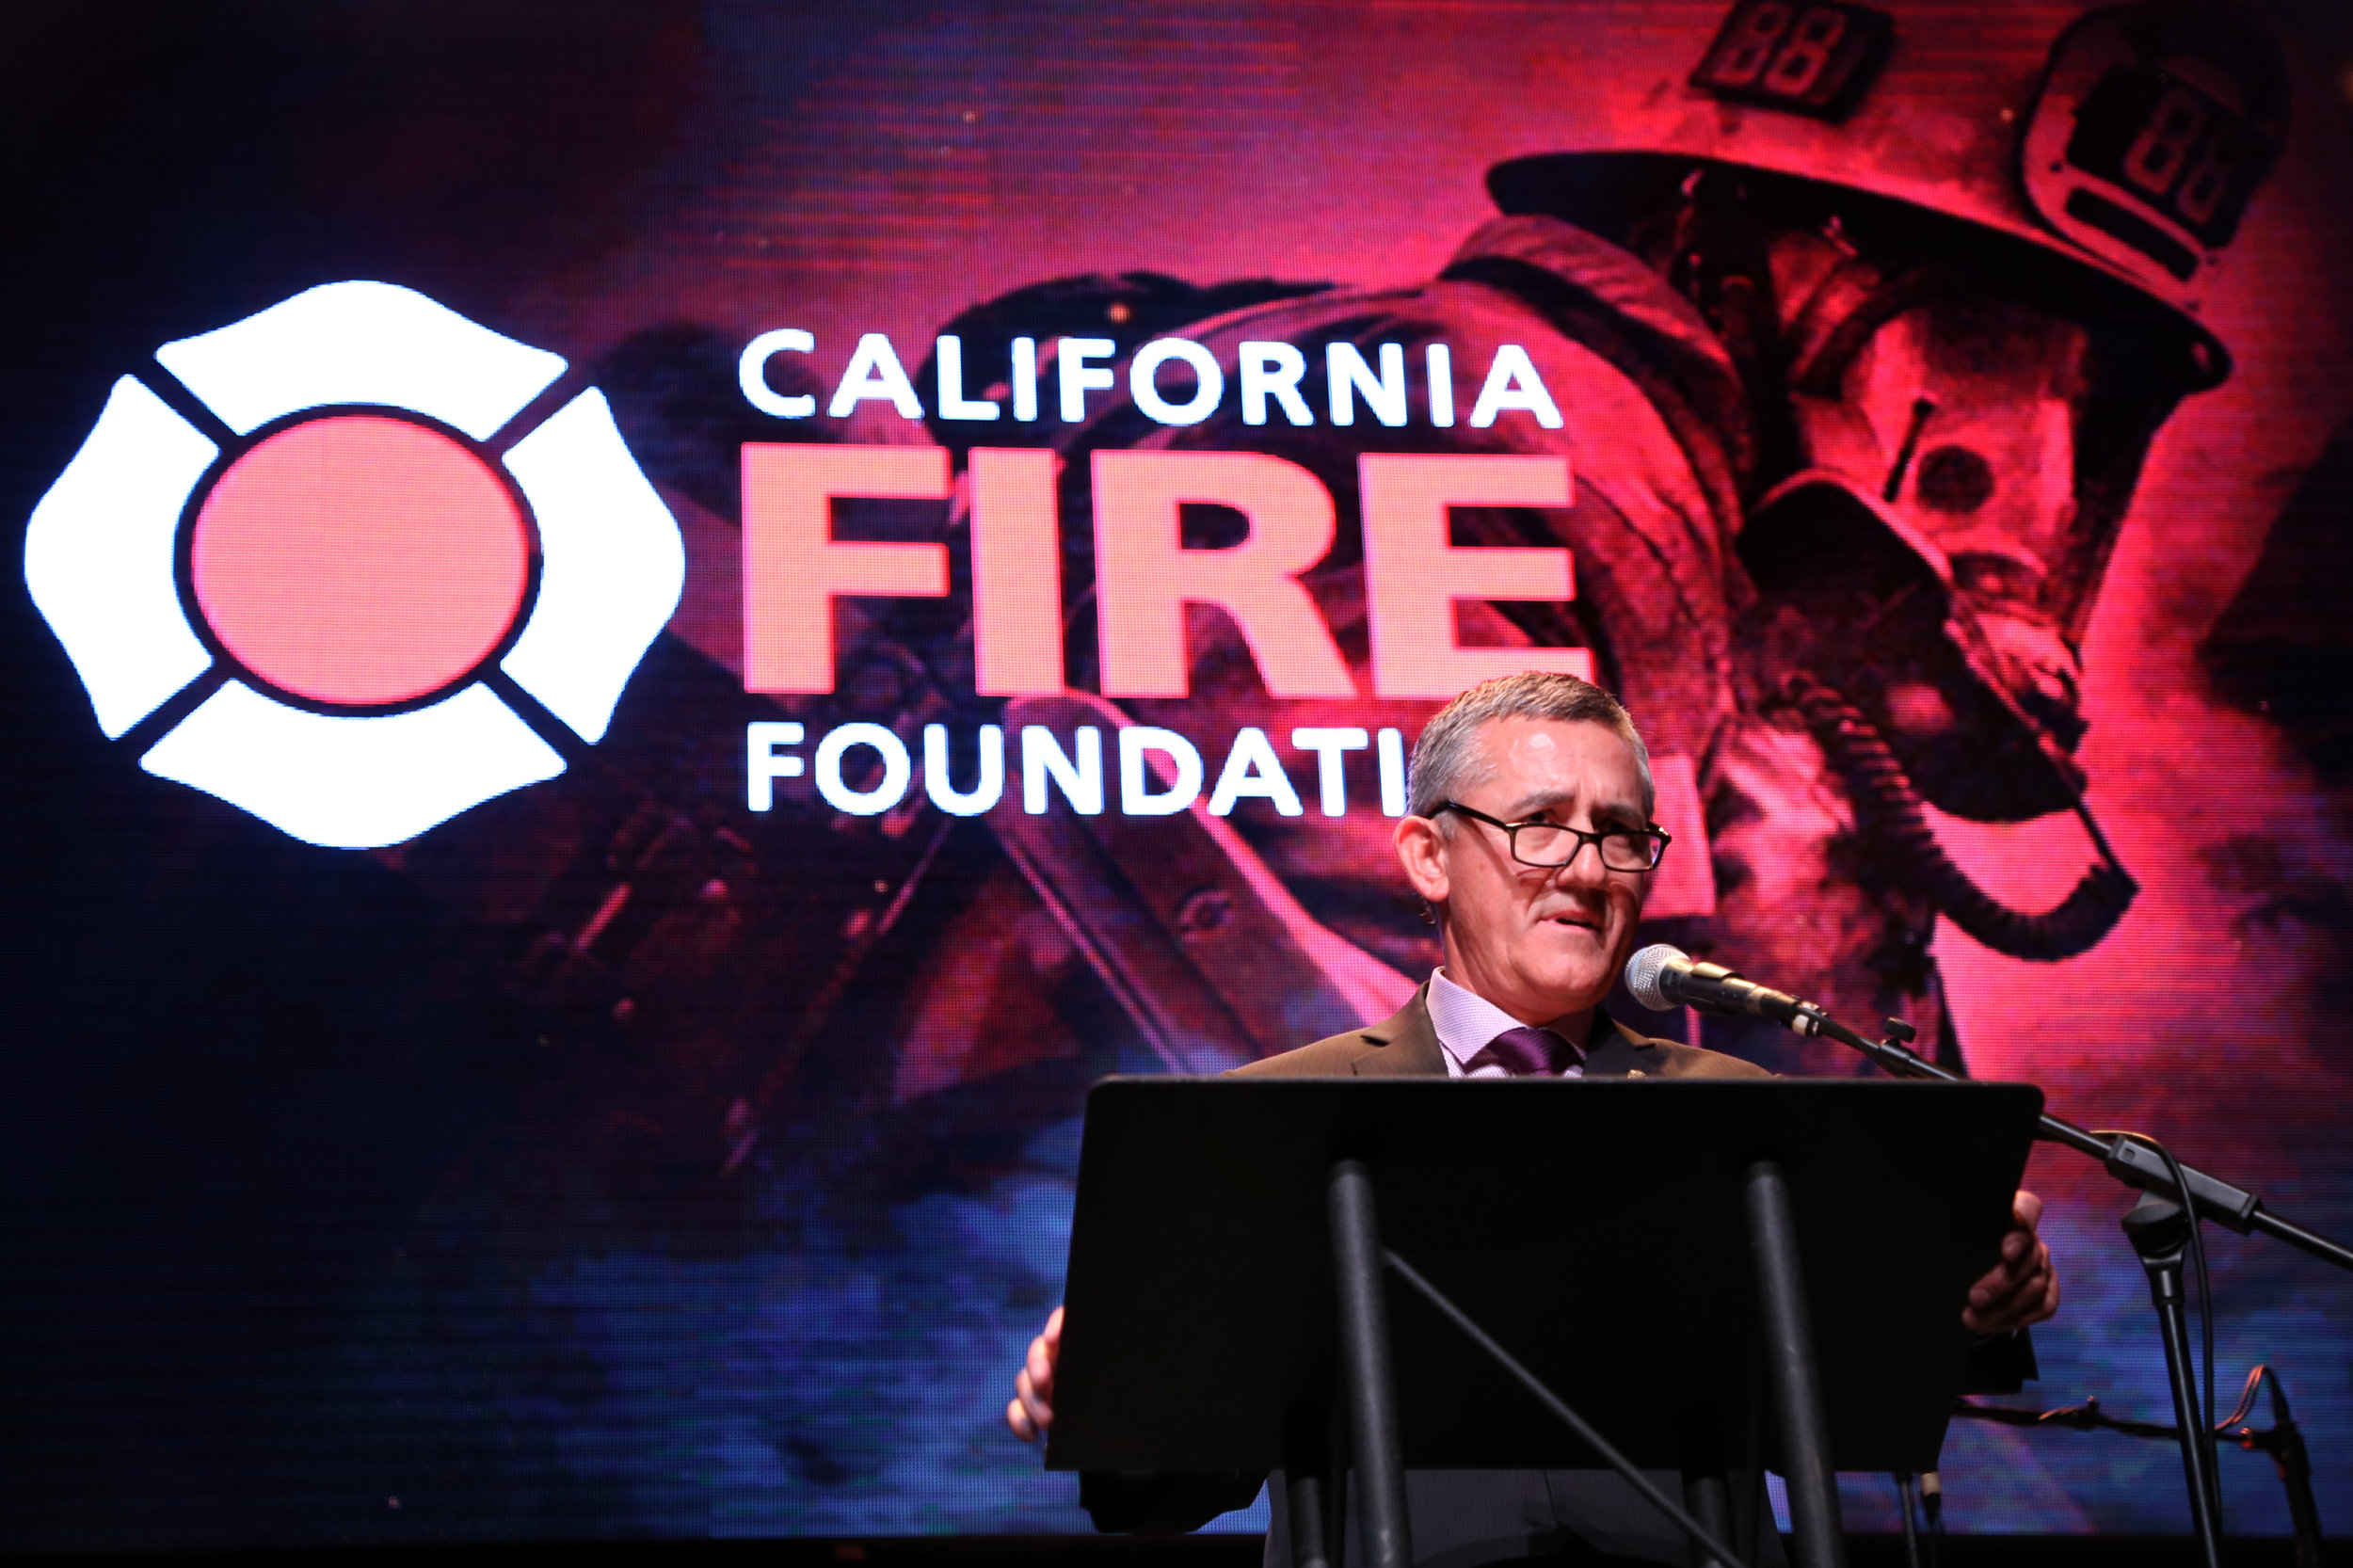  Photo: Getty Images on behalf of California Fire Foundation 